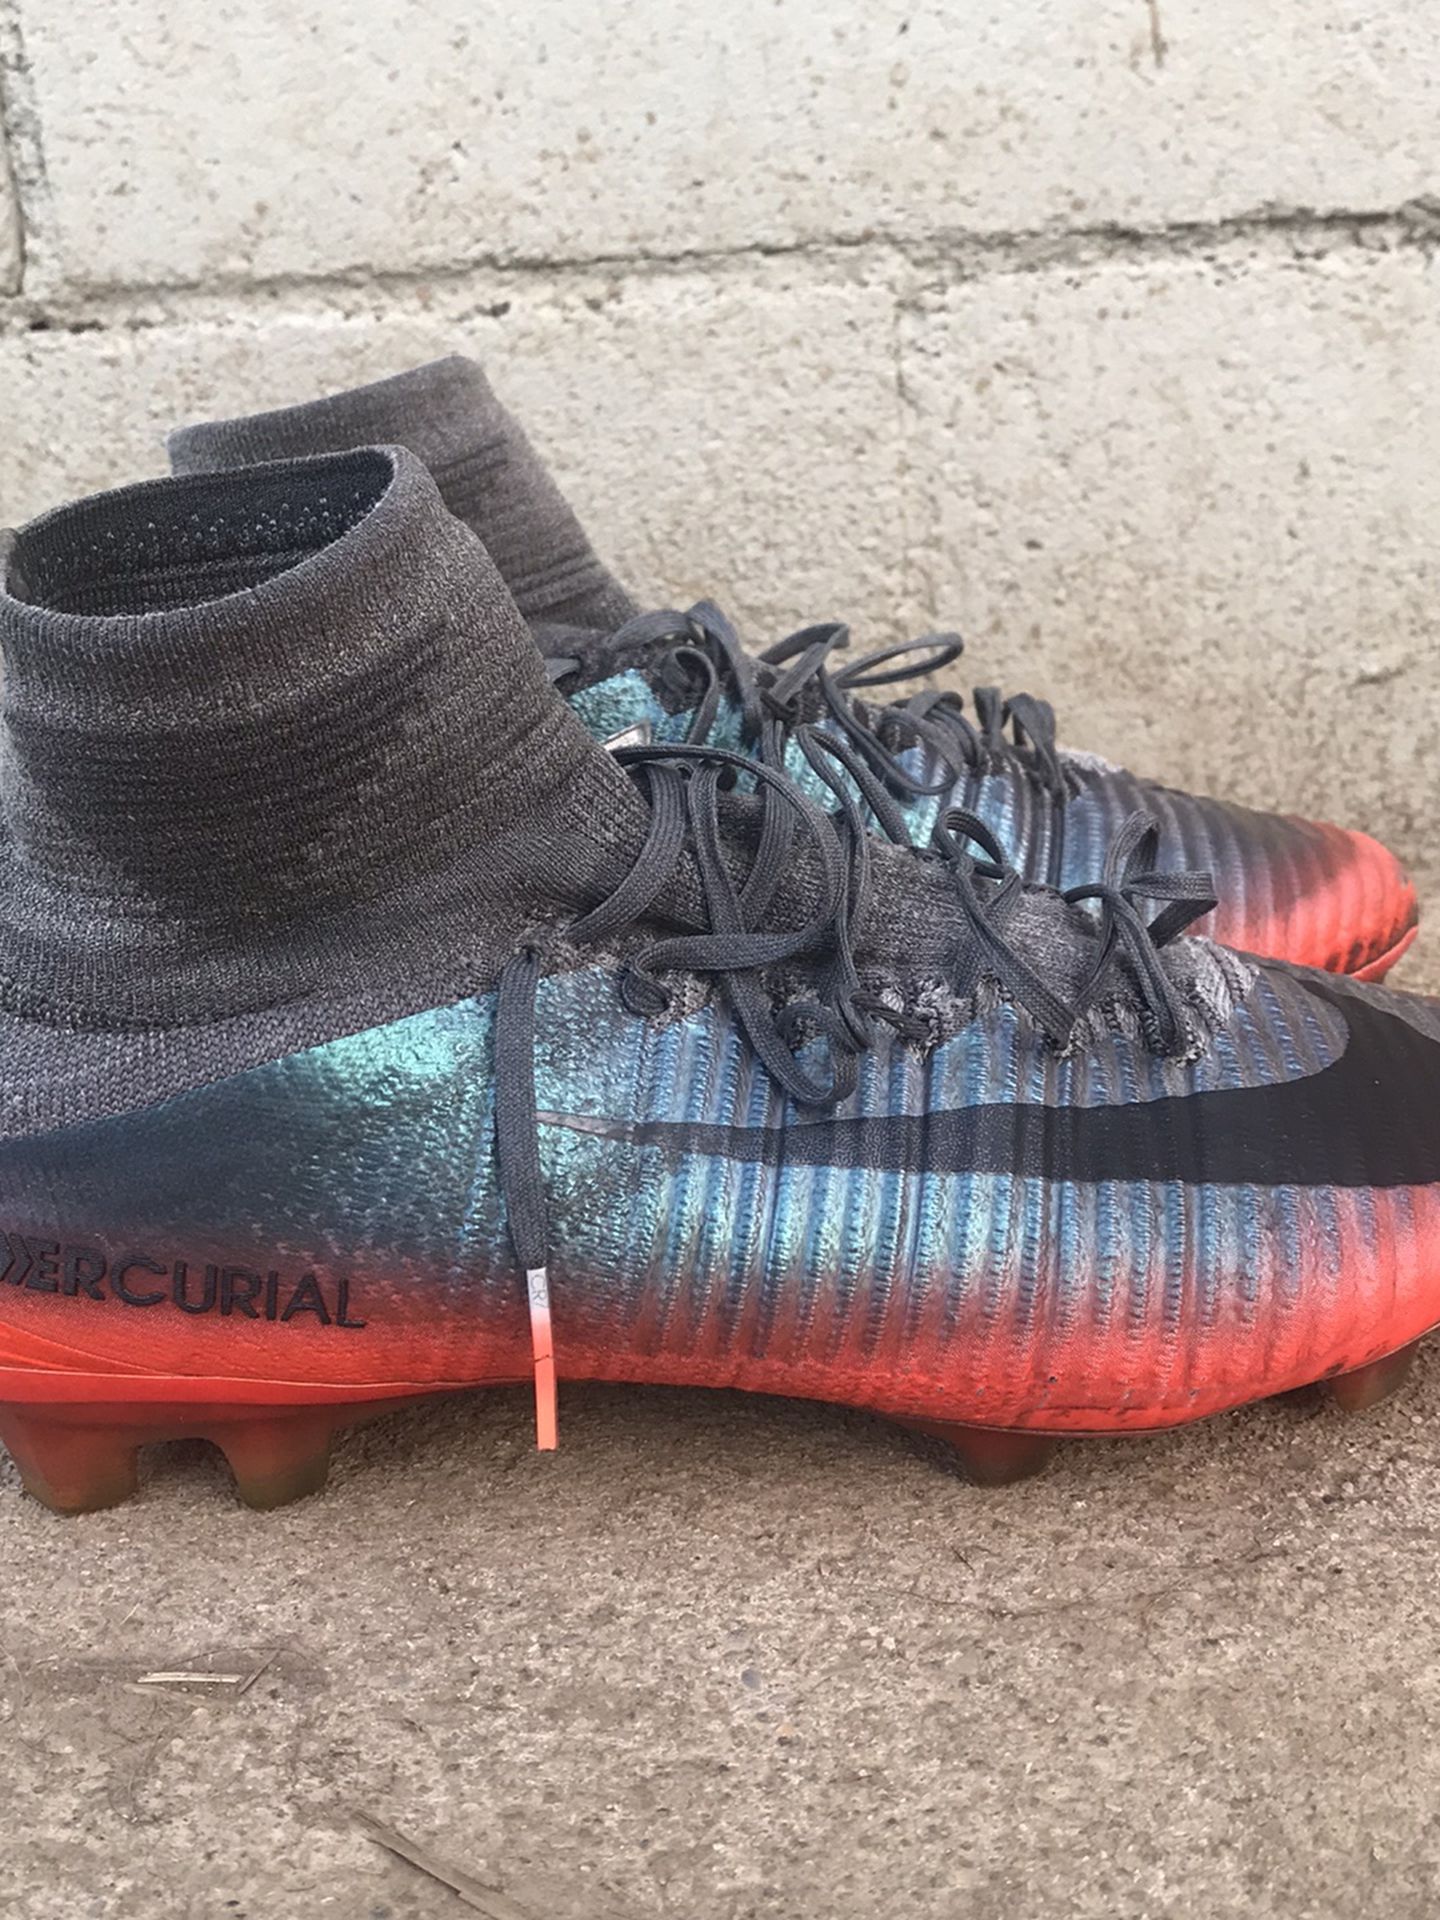 Nike Mercurial Superfly V CR7 Soccer Cleats